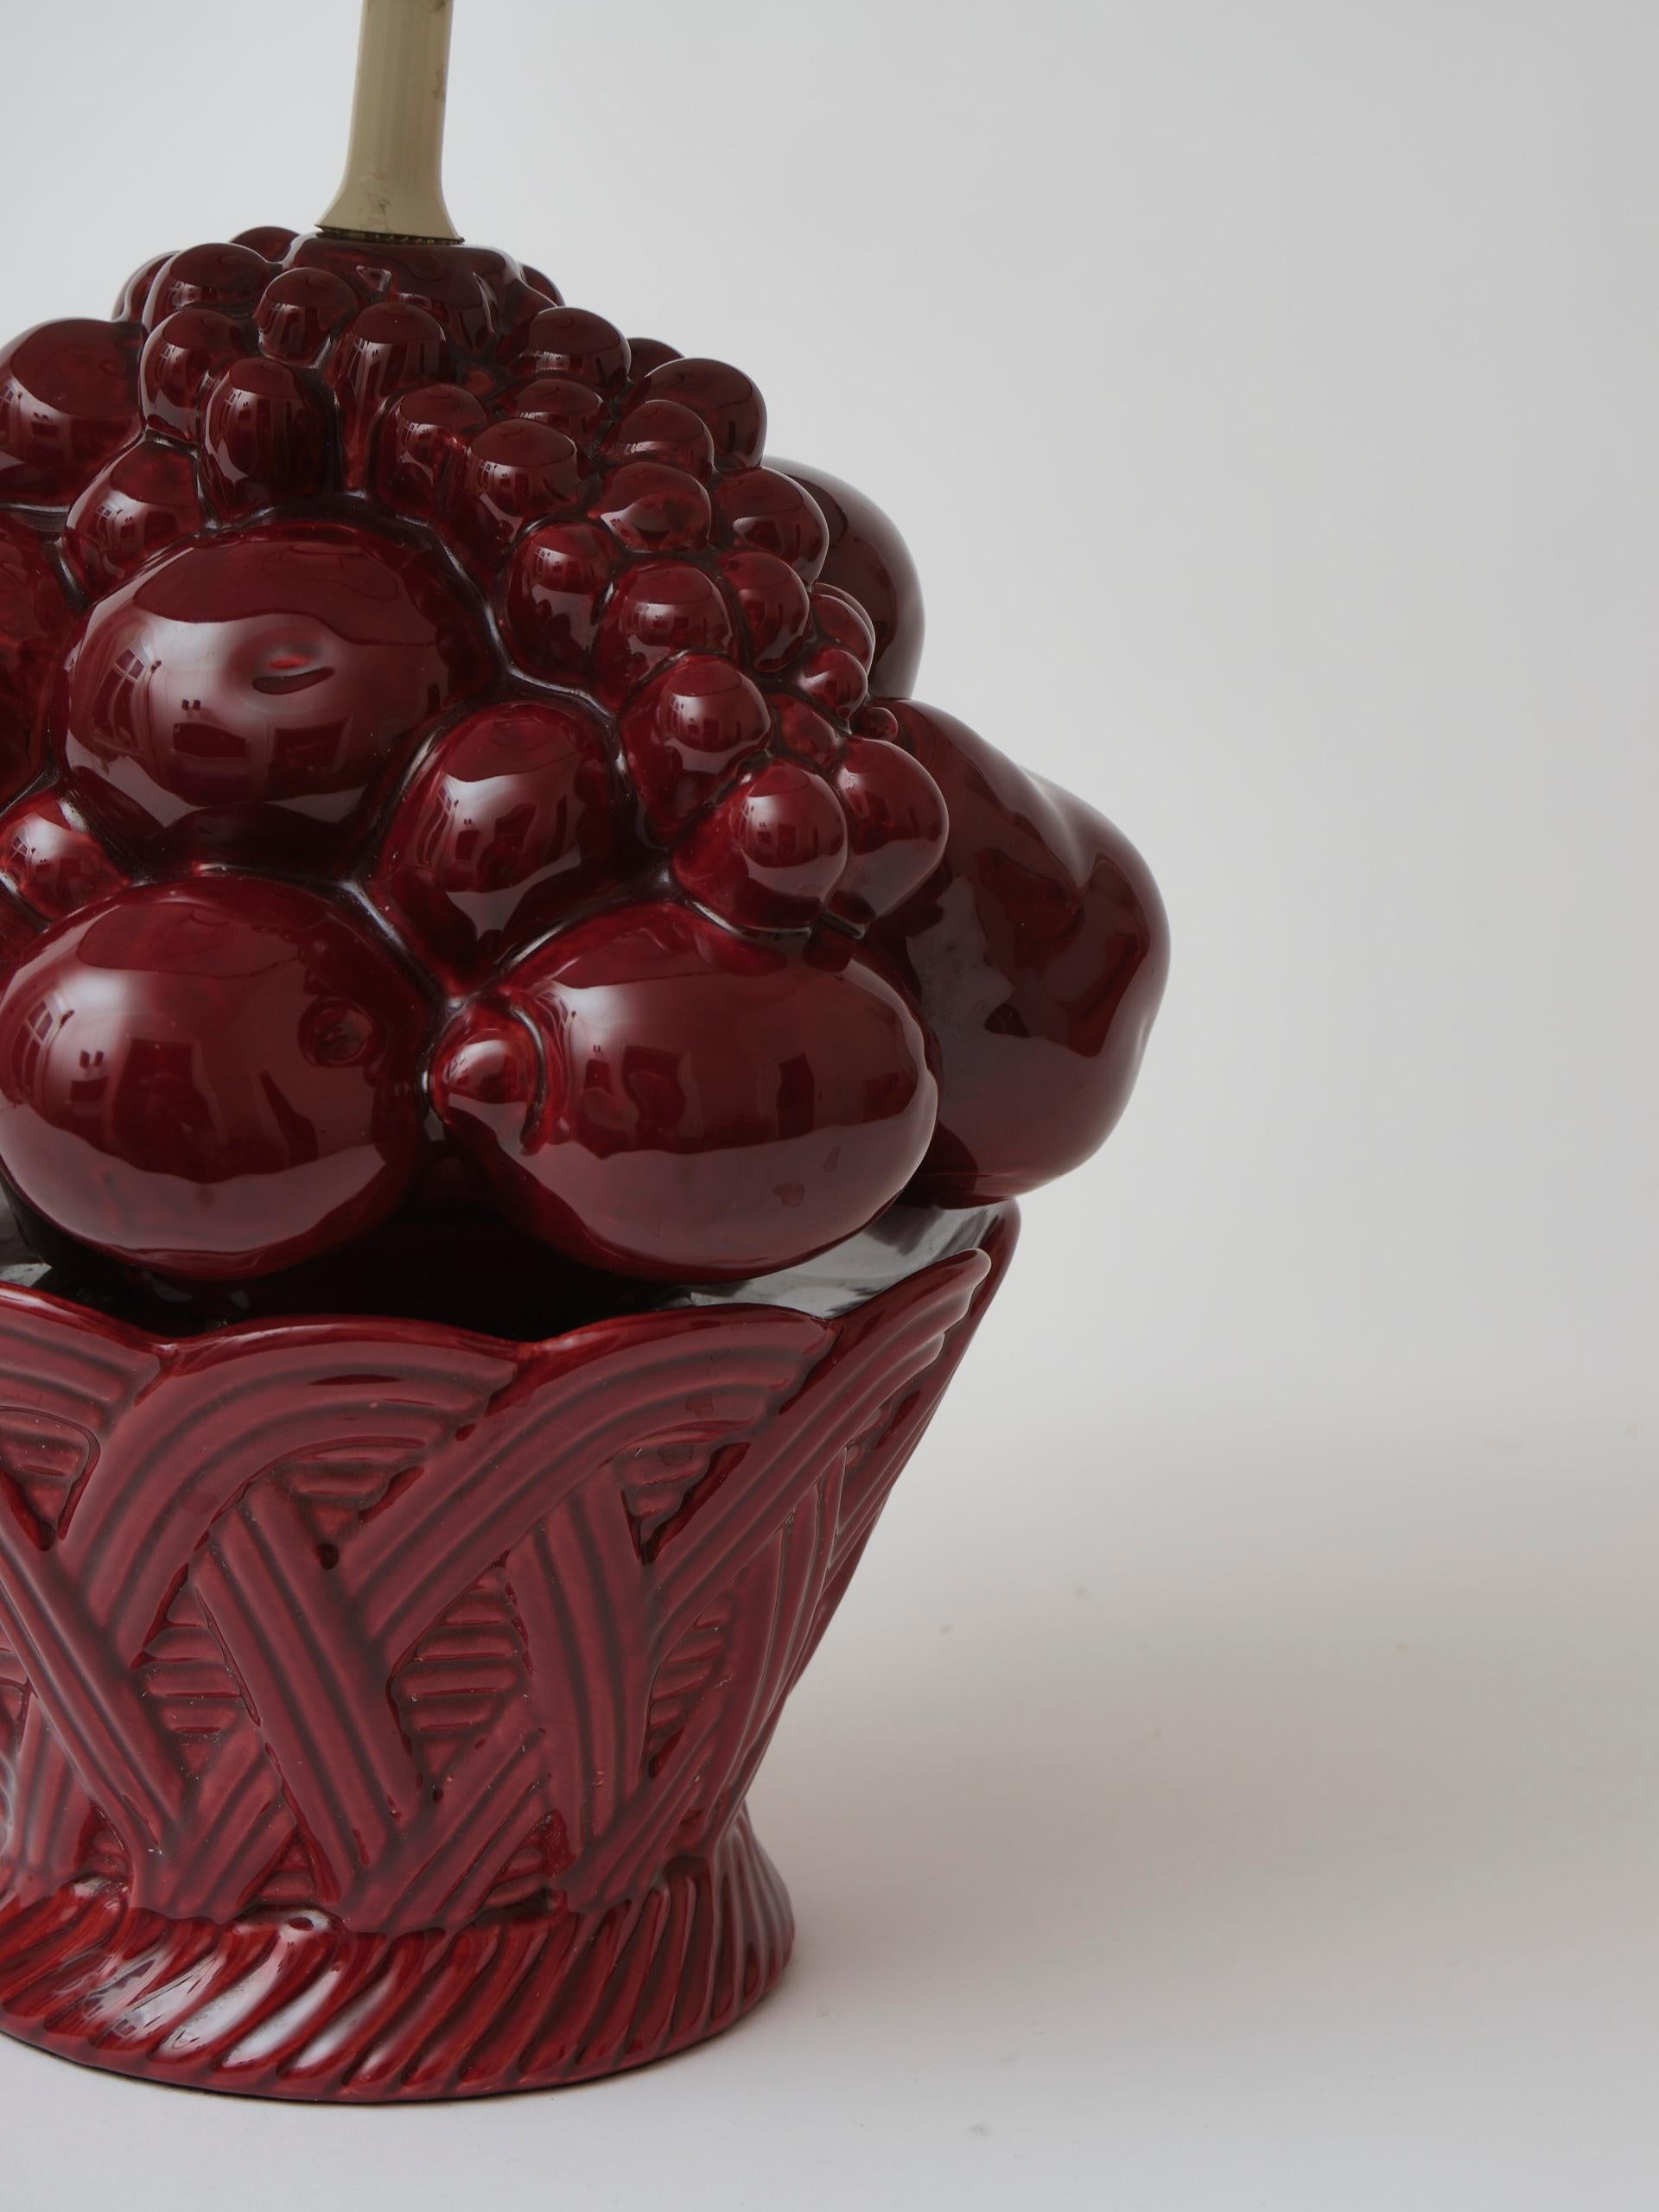 Glazed 1970s porcelain table lamp in the shape of a fruit bowl